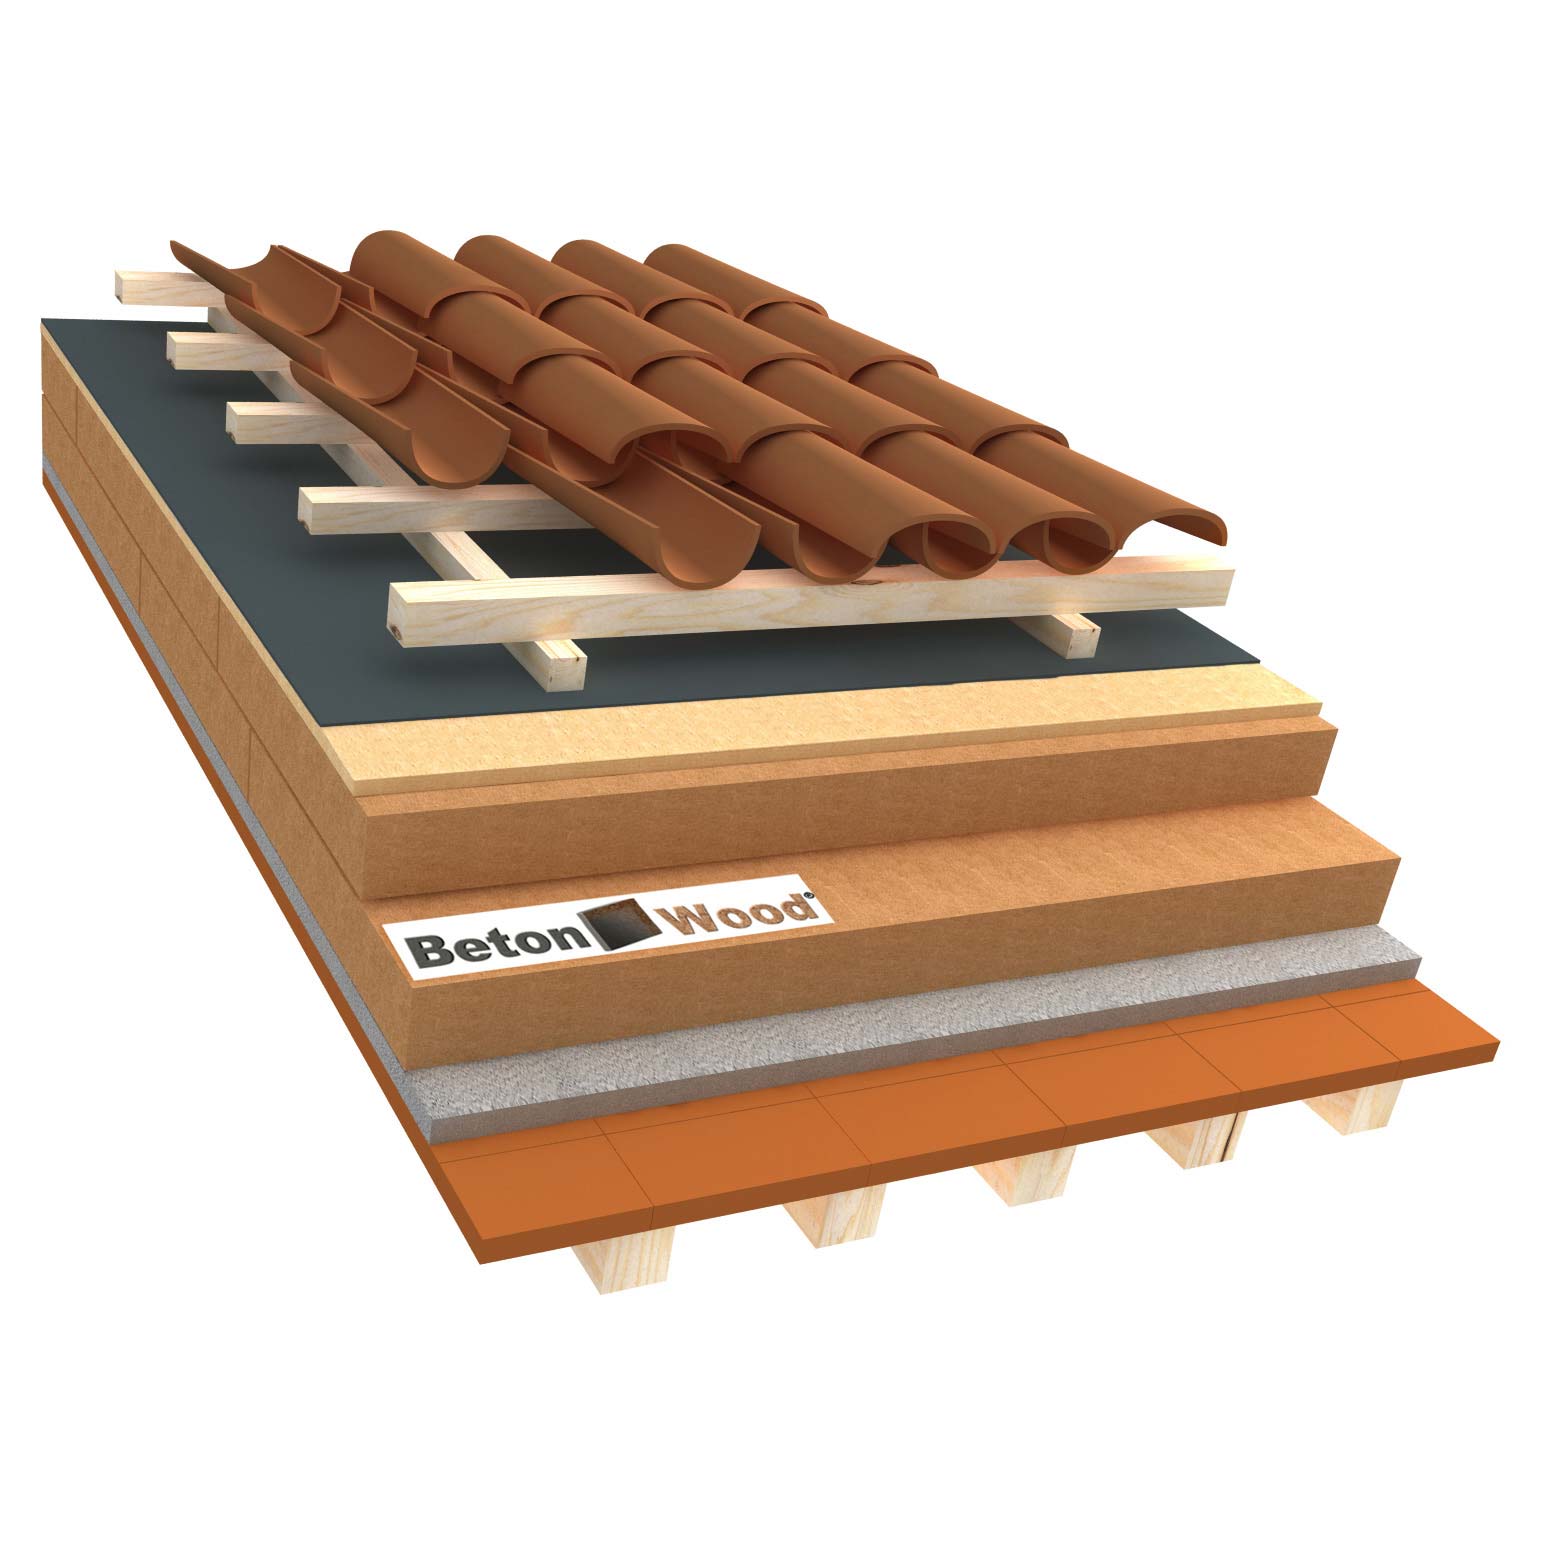 Ventilated roof with wood fiber Isorel and Special on terracotta tiles